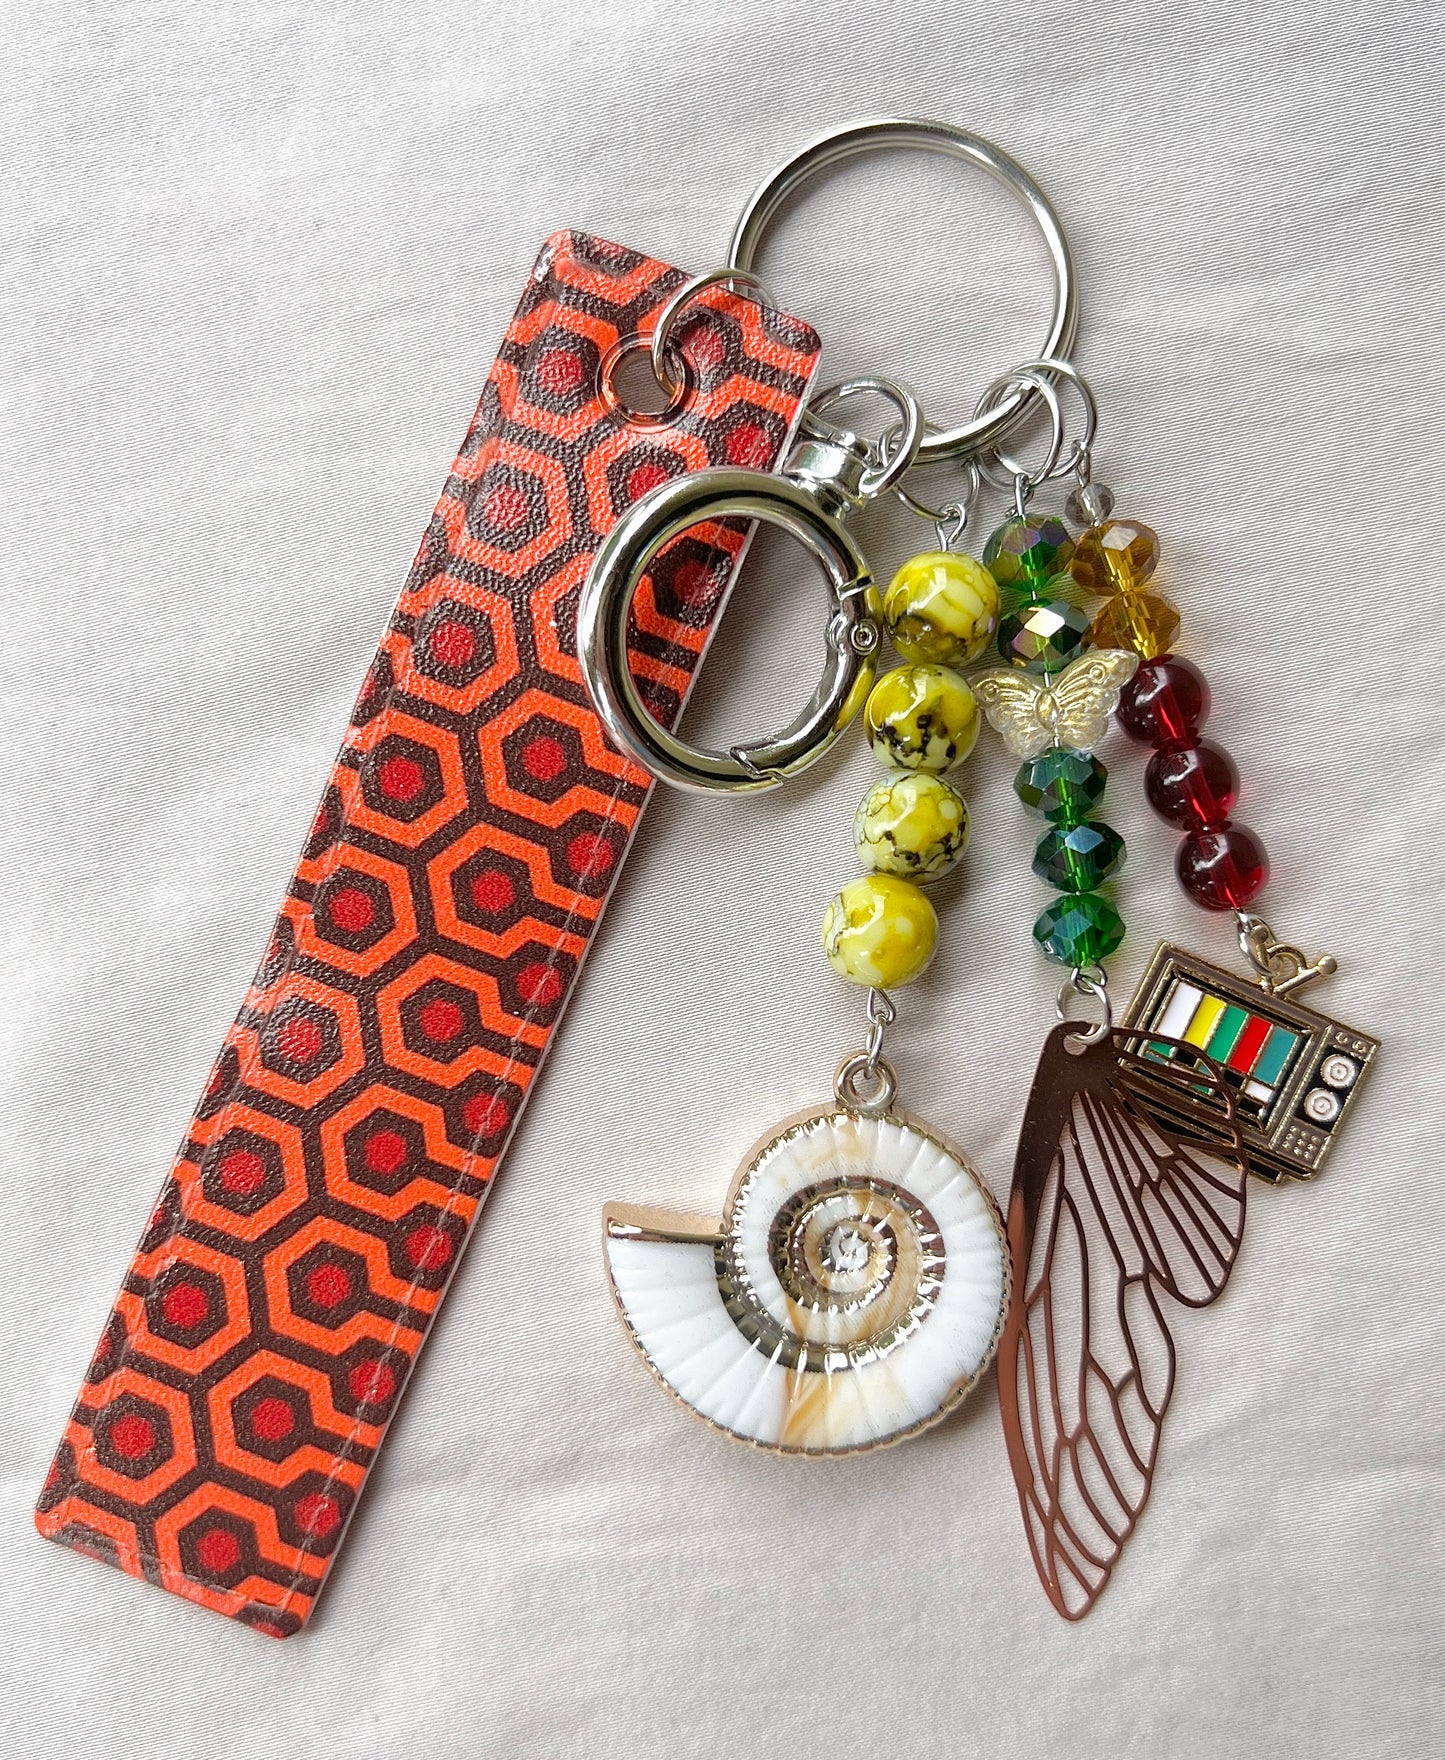 Lost in the Overlook Lucky Charm Keychain